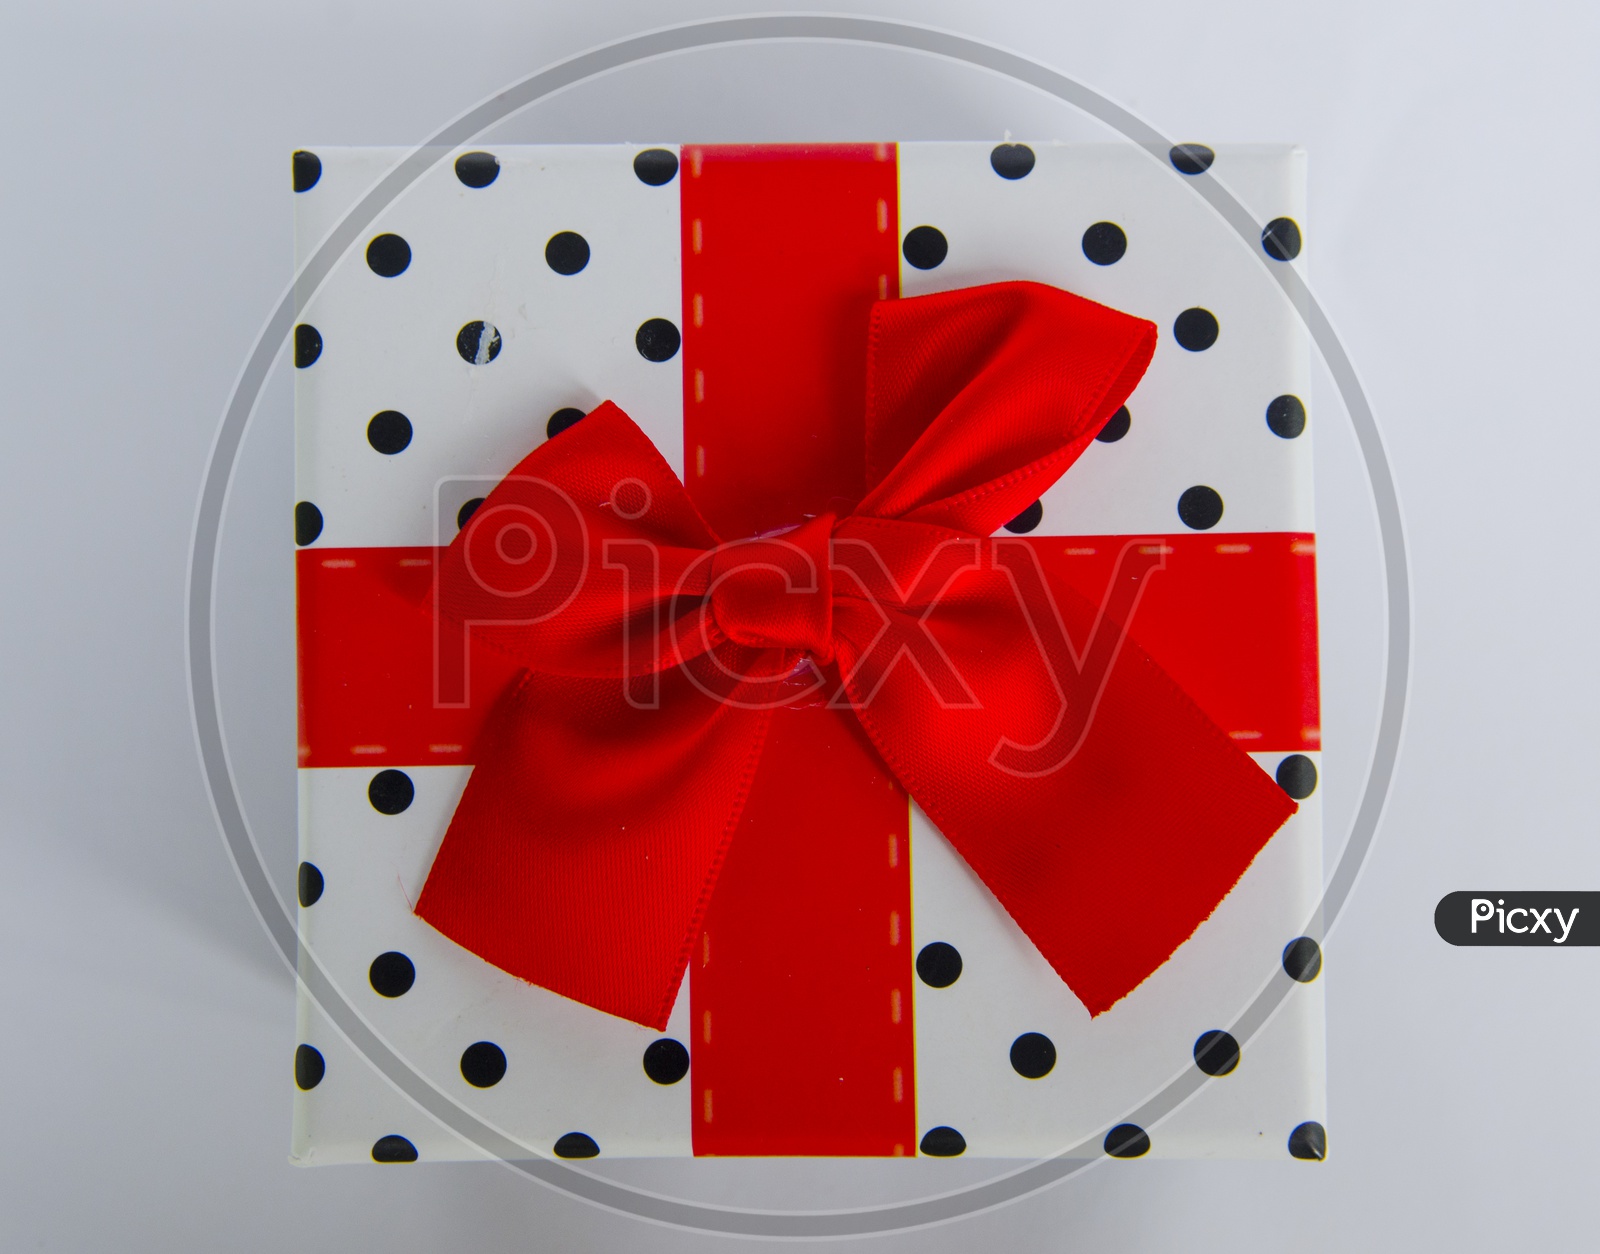 Christmas Gift Box On an isolated White background